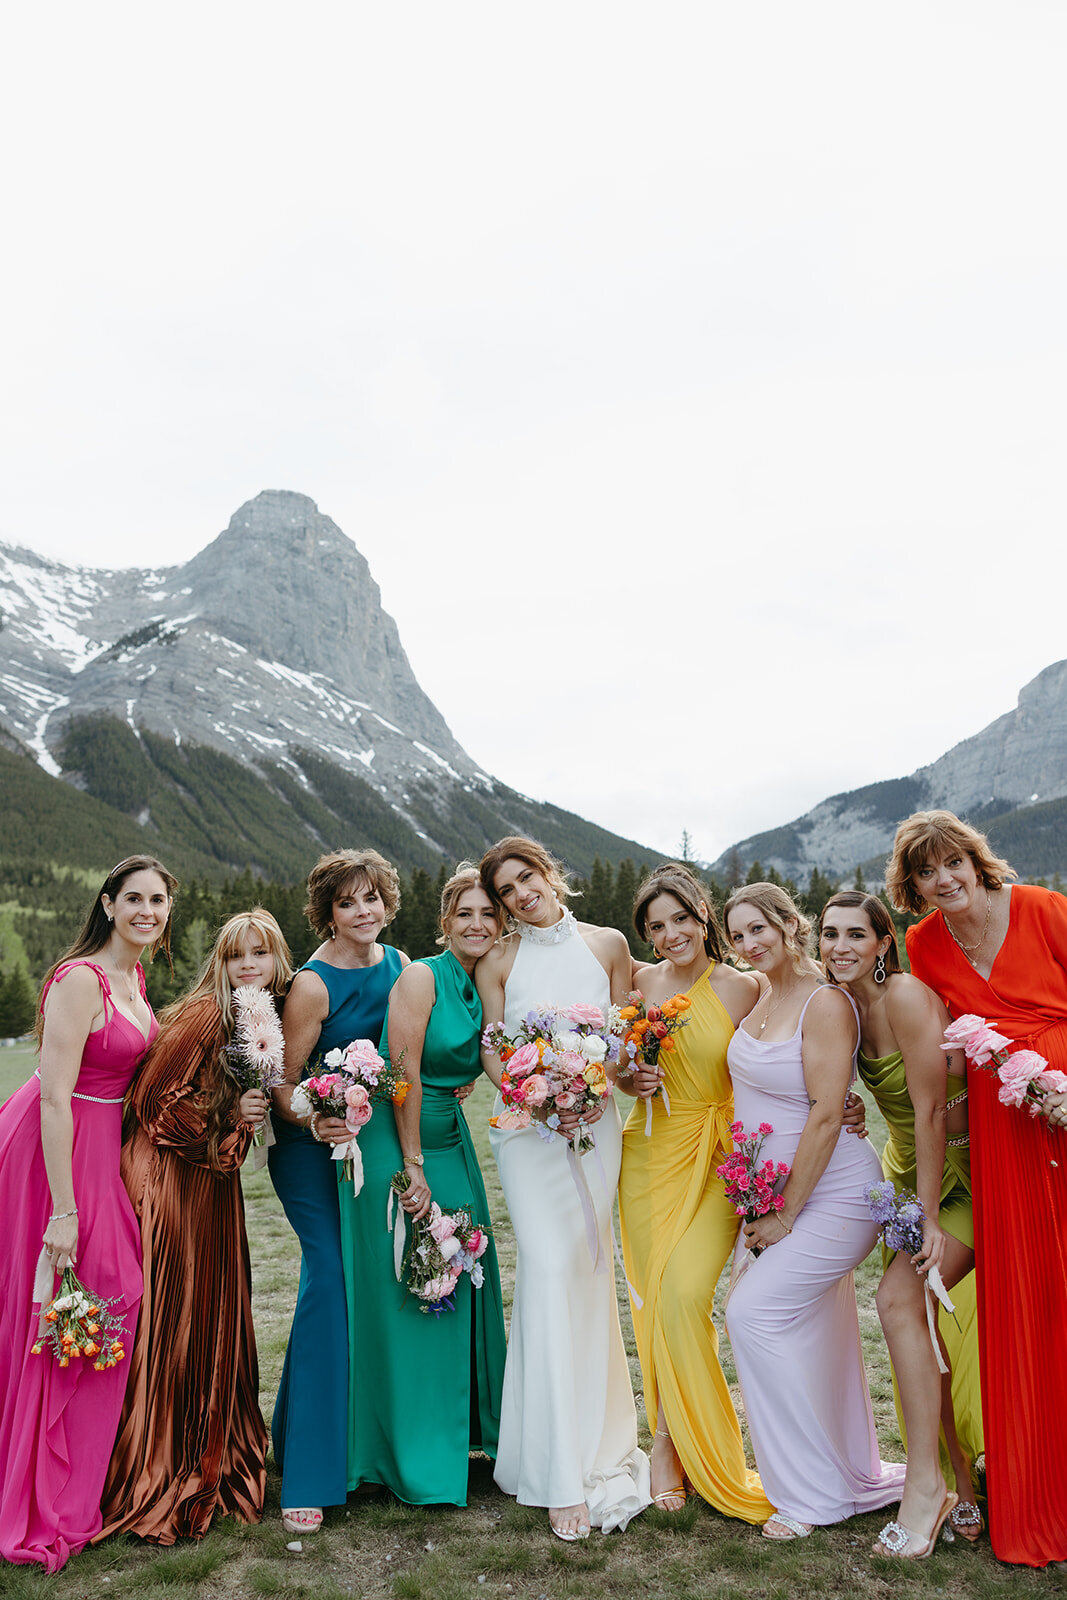 Atlanta Couple gets married in the Rocky Mountains, Banff Destination Wedding, Editorial Modern Aesthetic